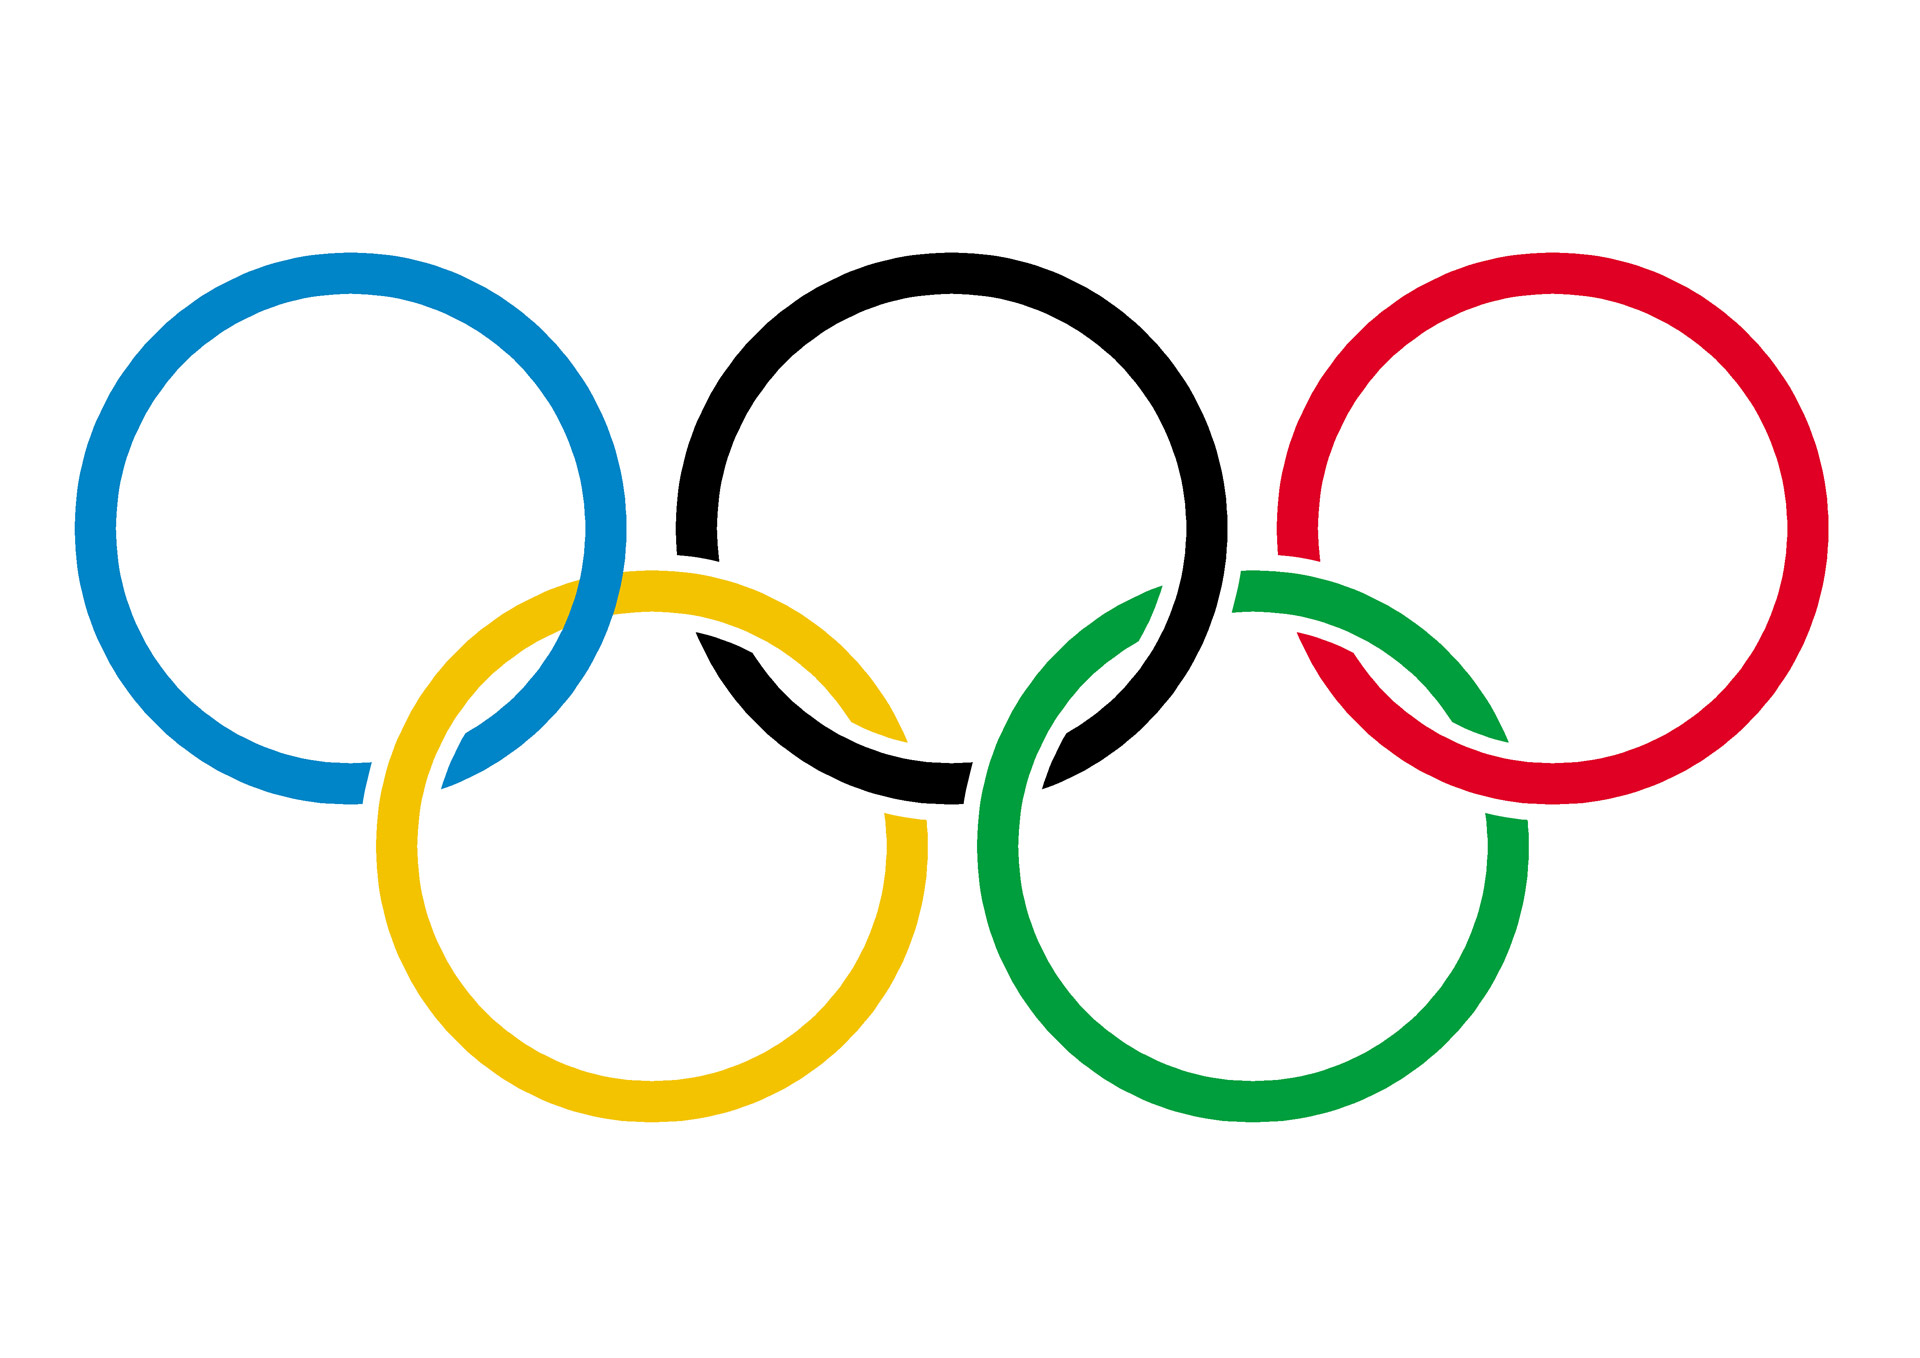 Human Right groups ask IOC to reconsider the decision to hold 2020 Winter Olympics in China 